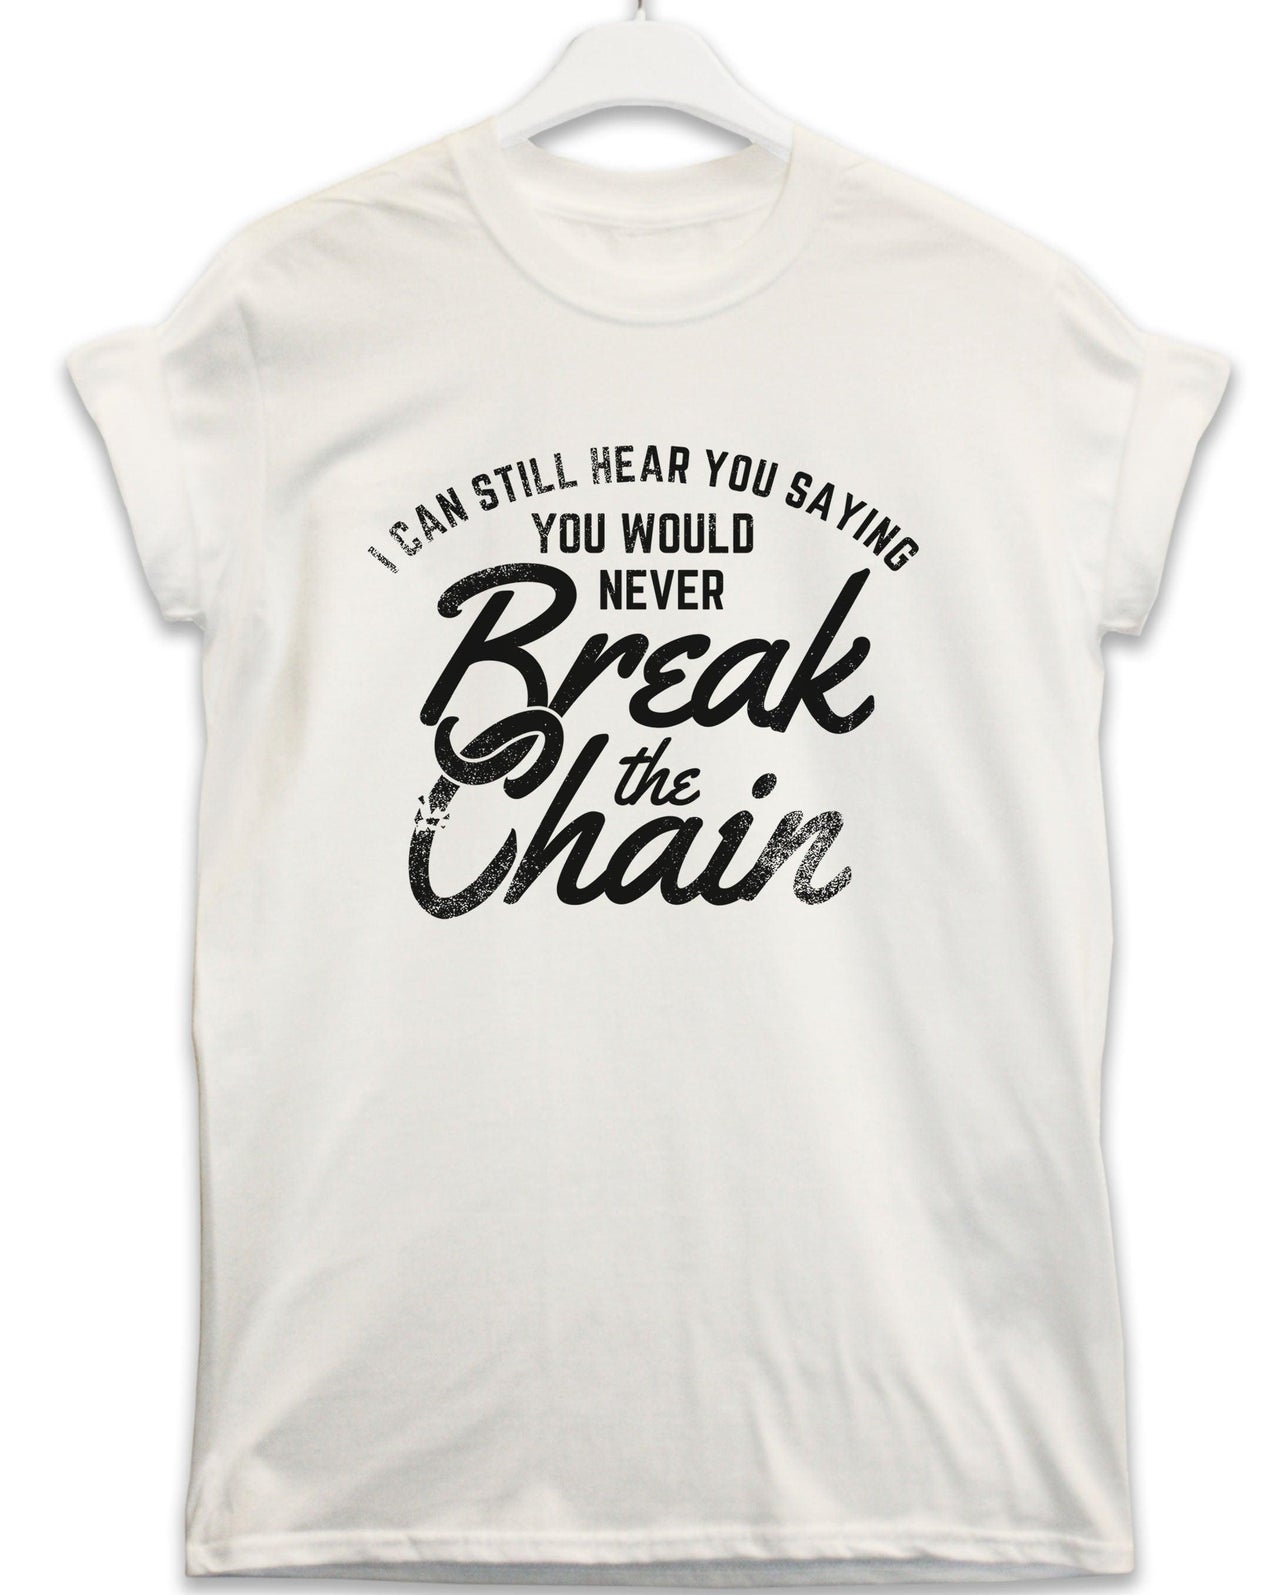 Break the Chain Lyric Quote Unisex T-Shirt For Men And Women 8Ball